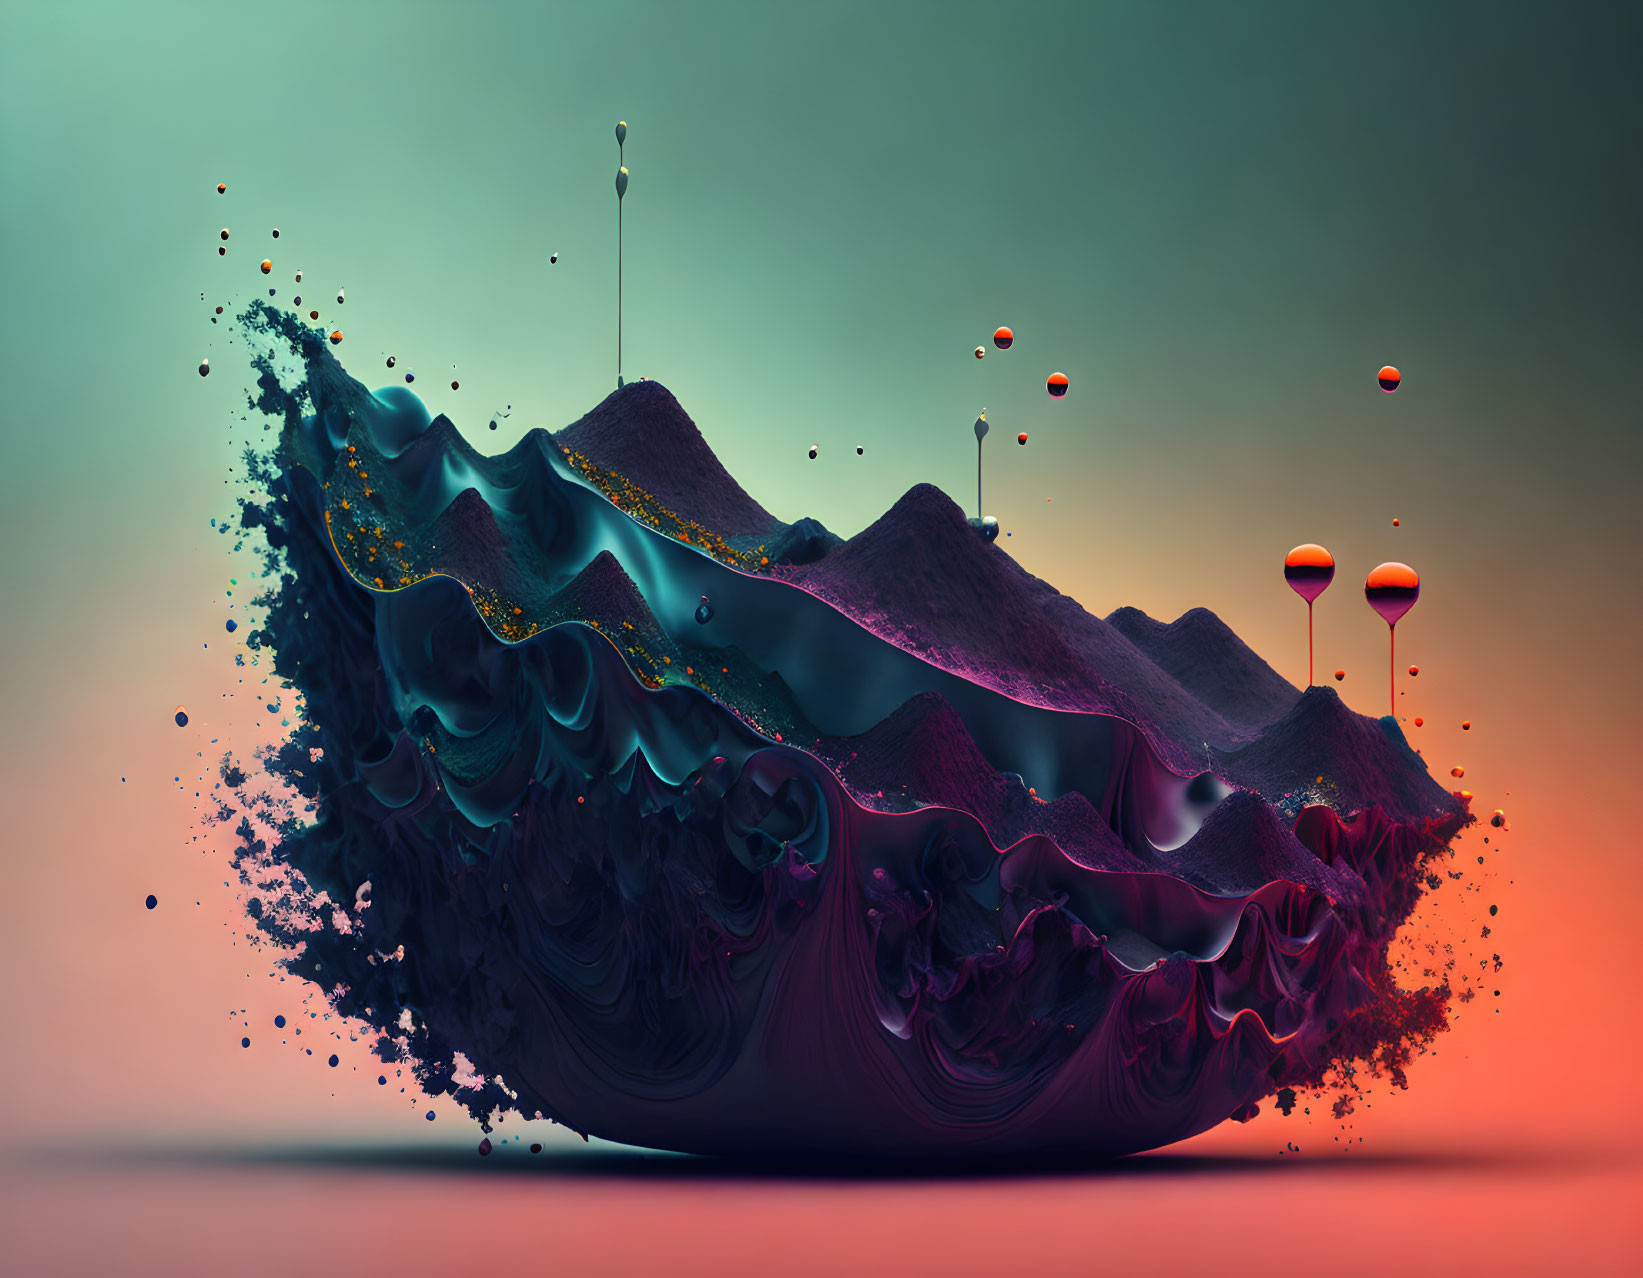 Colorful Surreal Digital Artwork: Fluid Wave with Intricate Textures and Spherical Elements